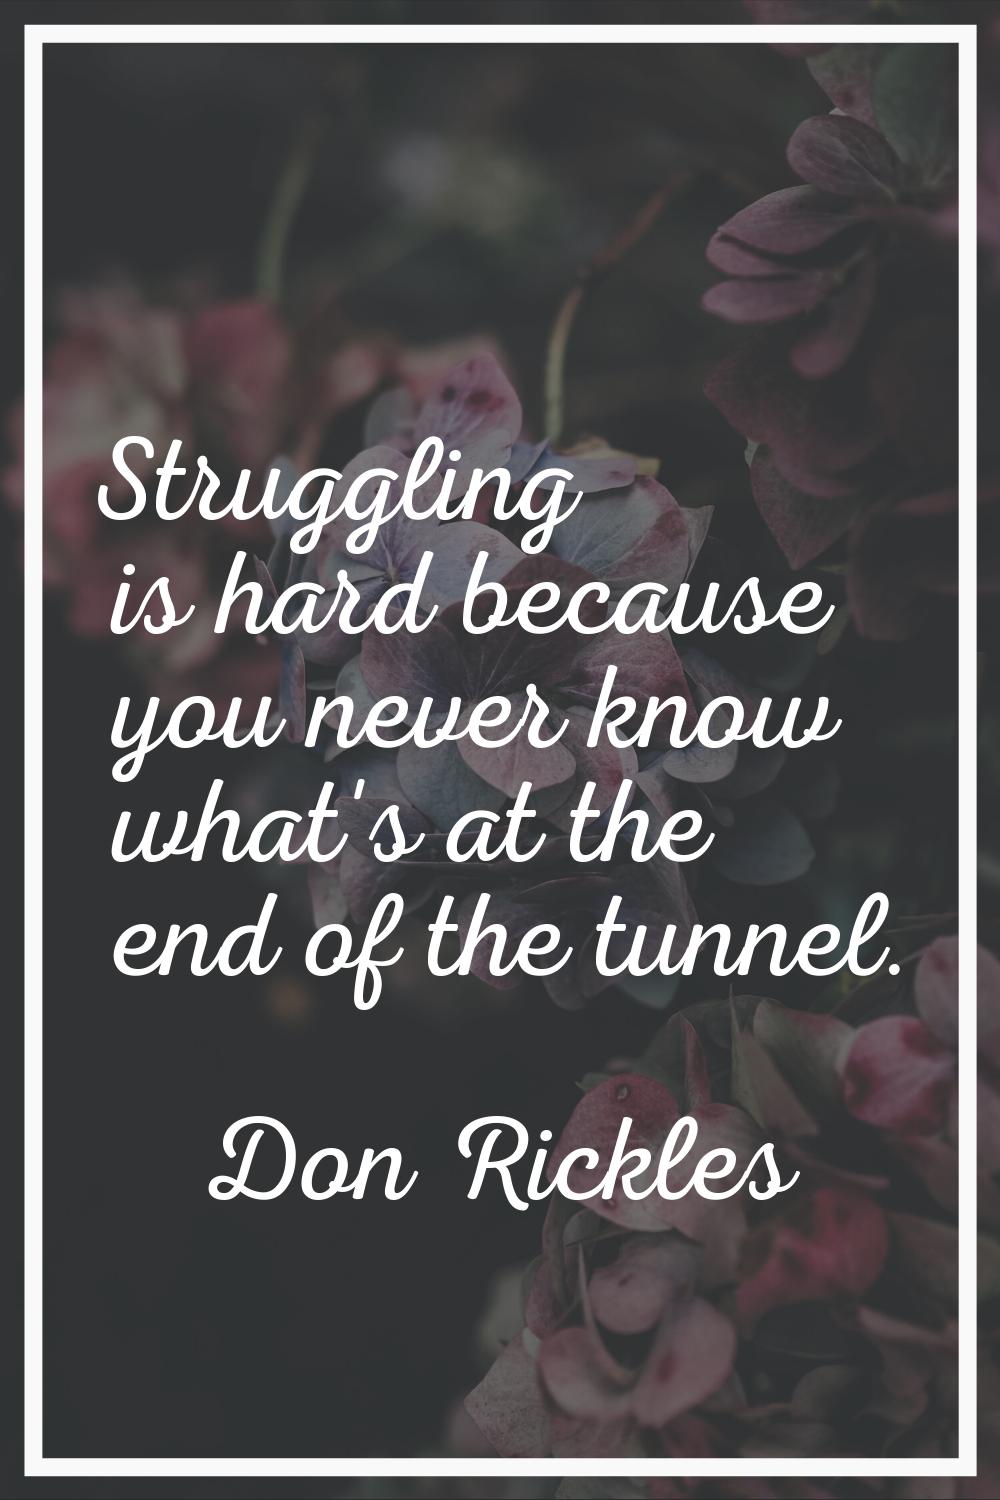 Struggling is hard because you never know what's at the end of the tunnel.